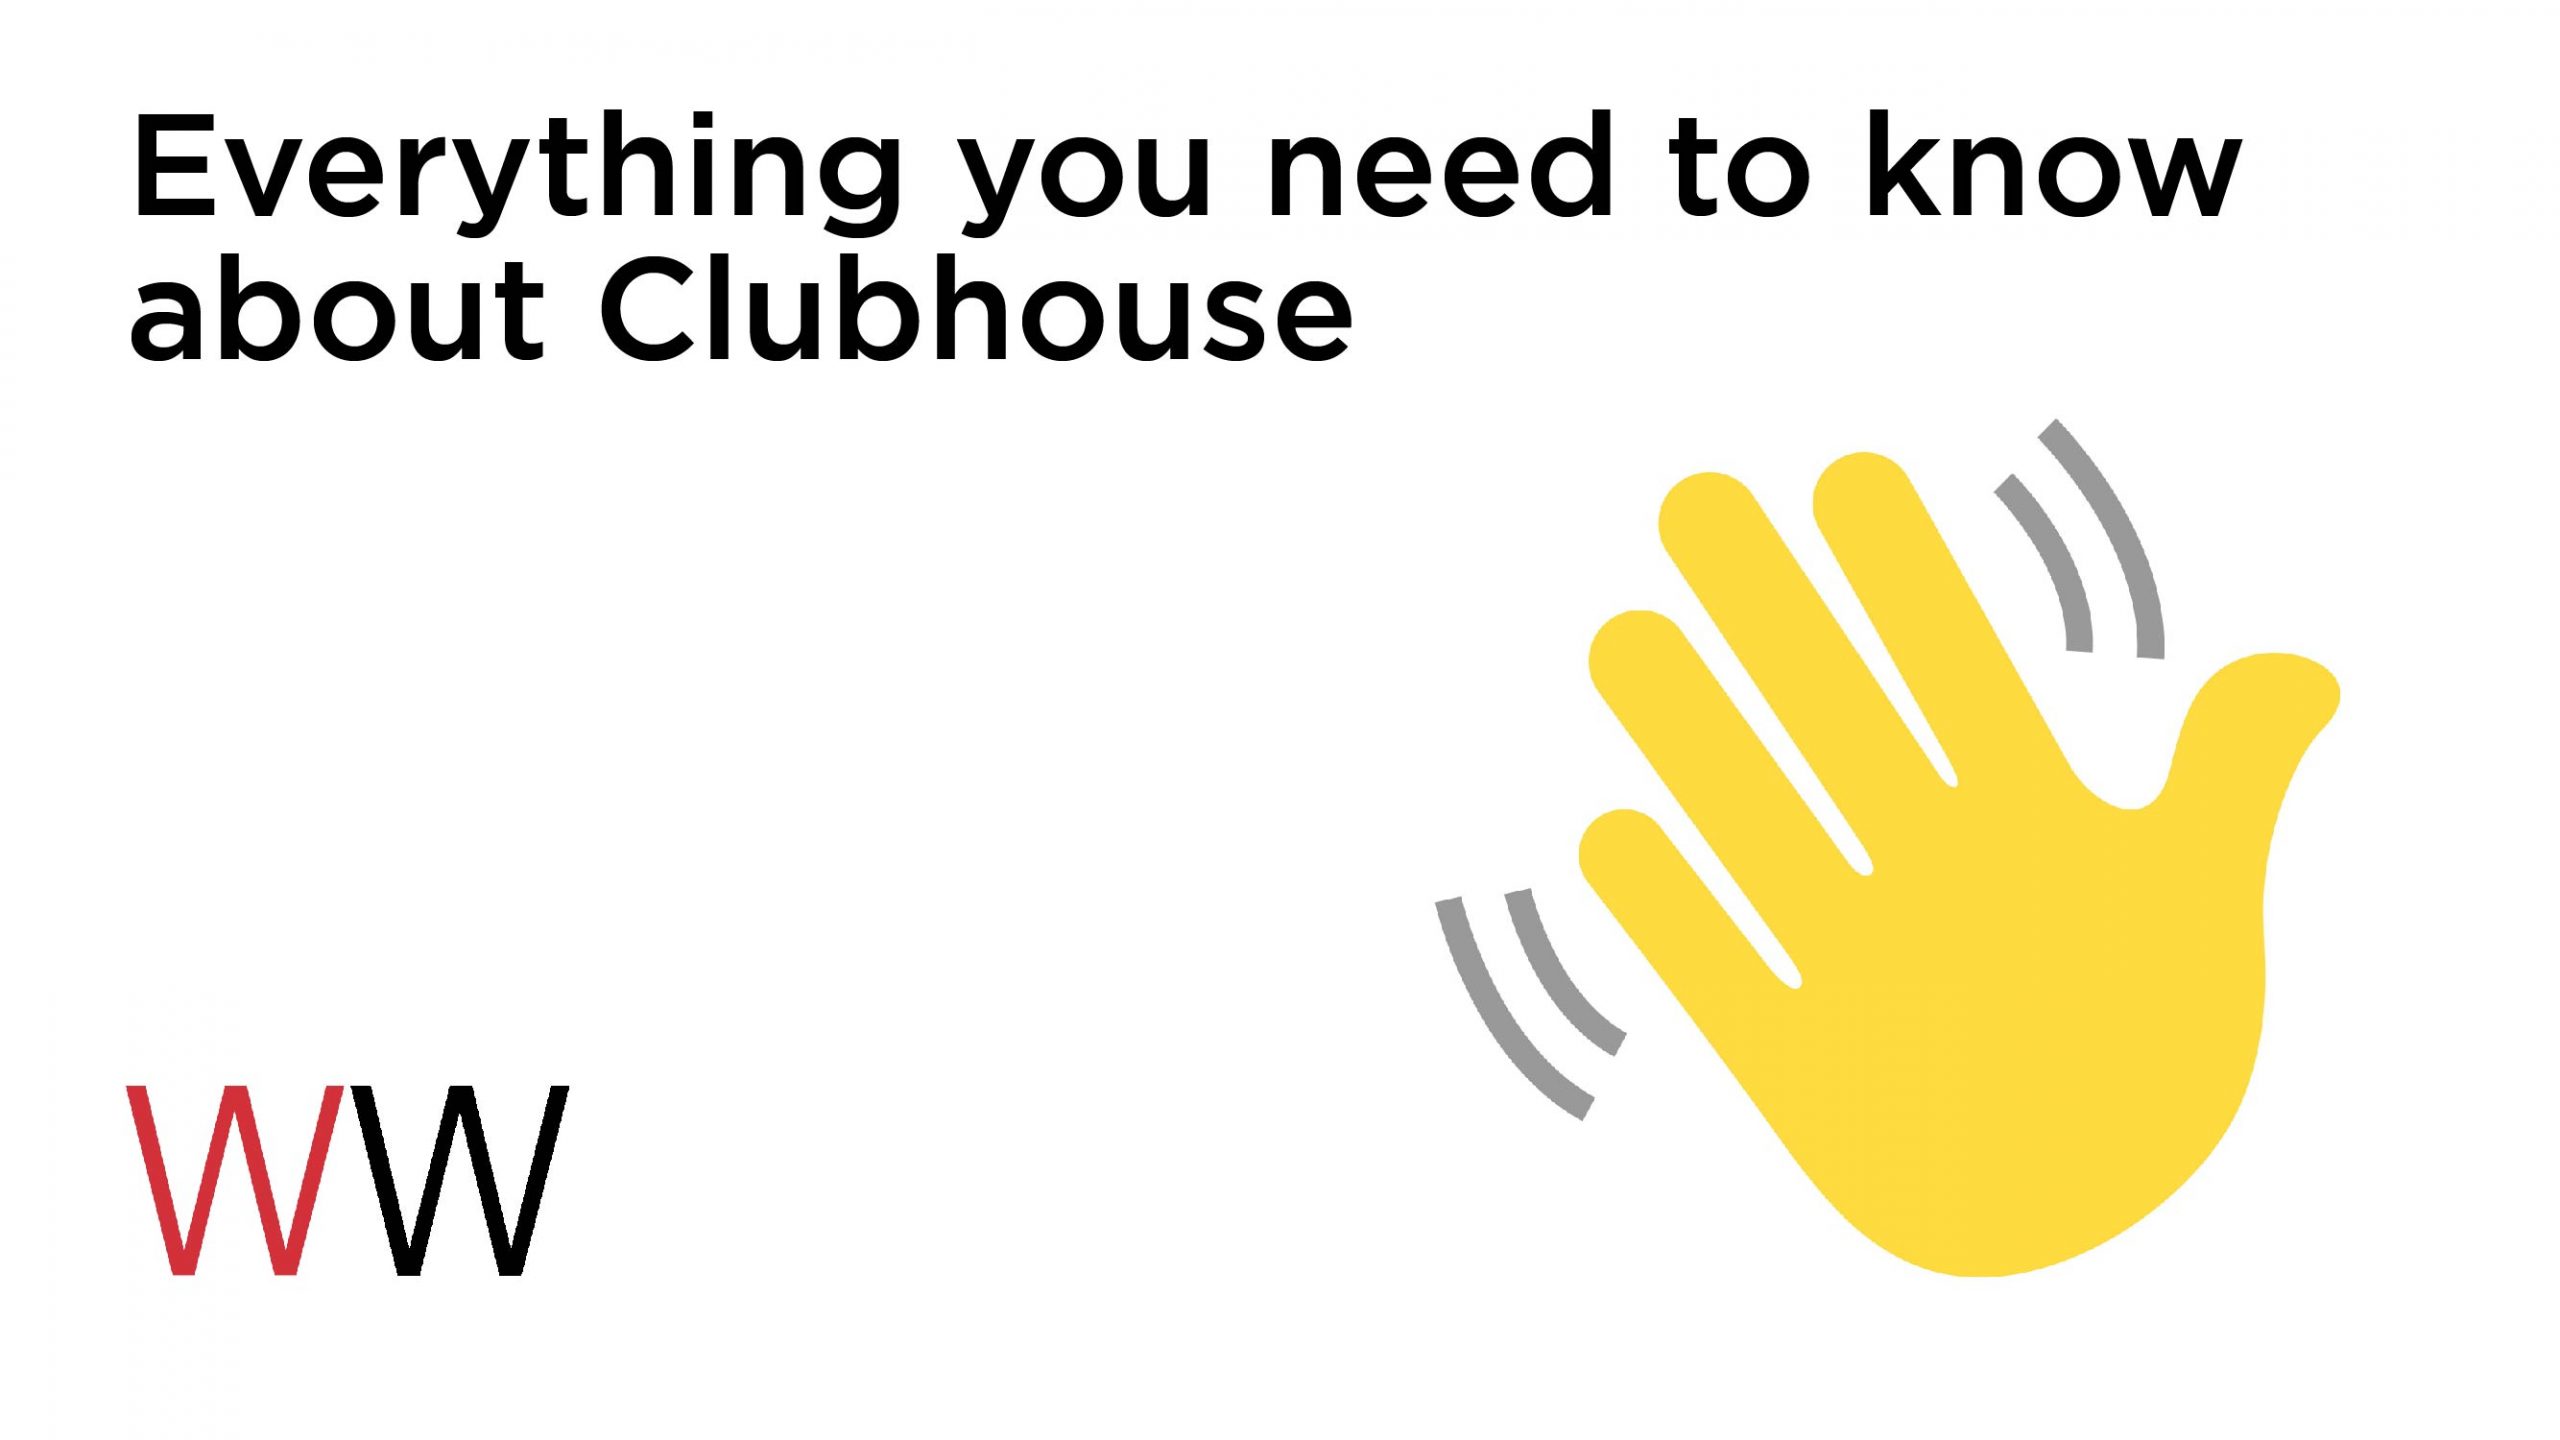 Everything you need to know about Clubhouse